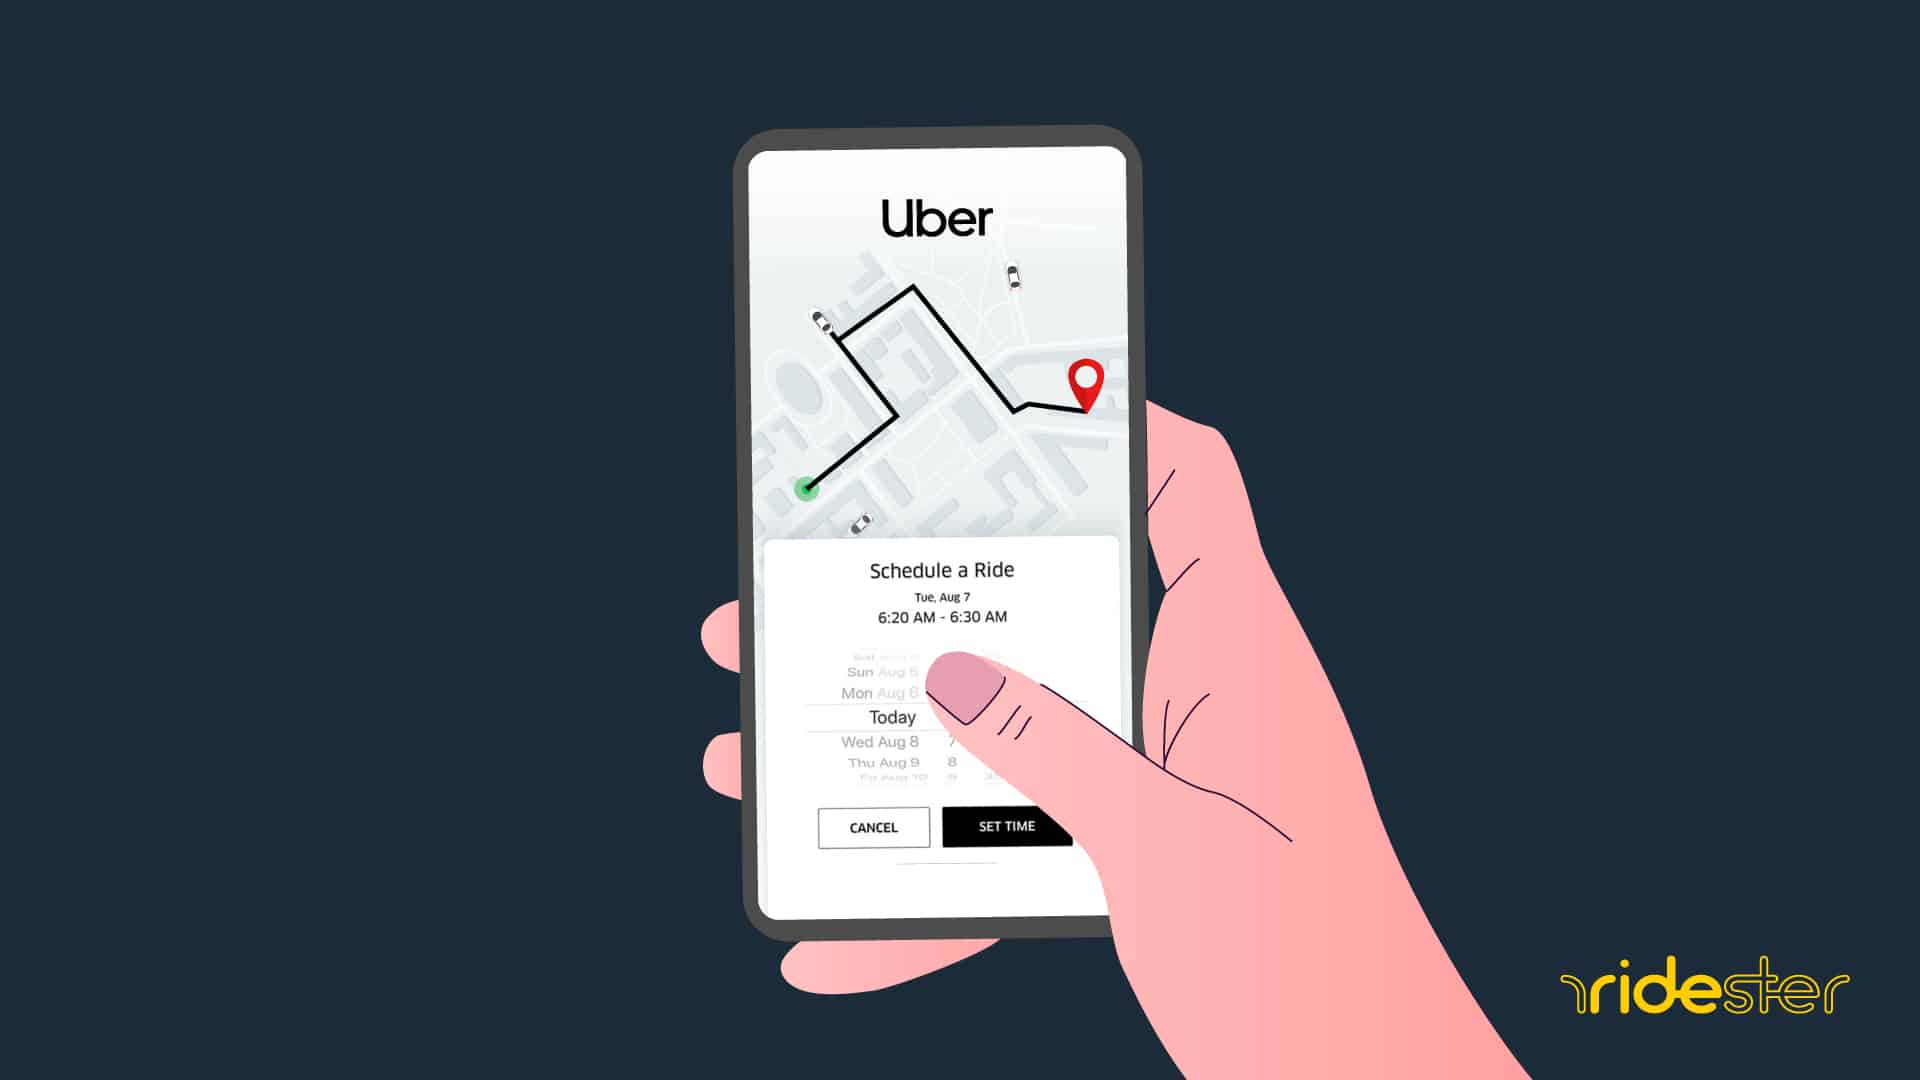 hand holding a mobile phone and in the process of getting a ride by using the schedule uber feature on the screen